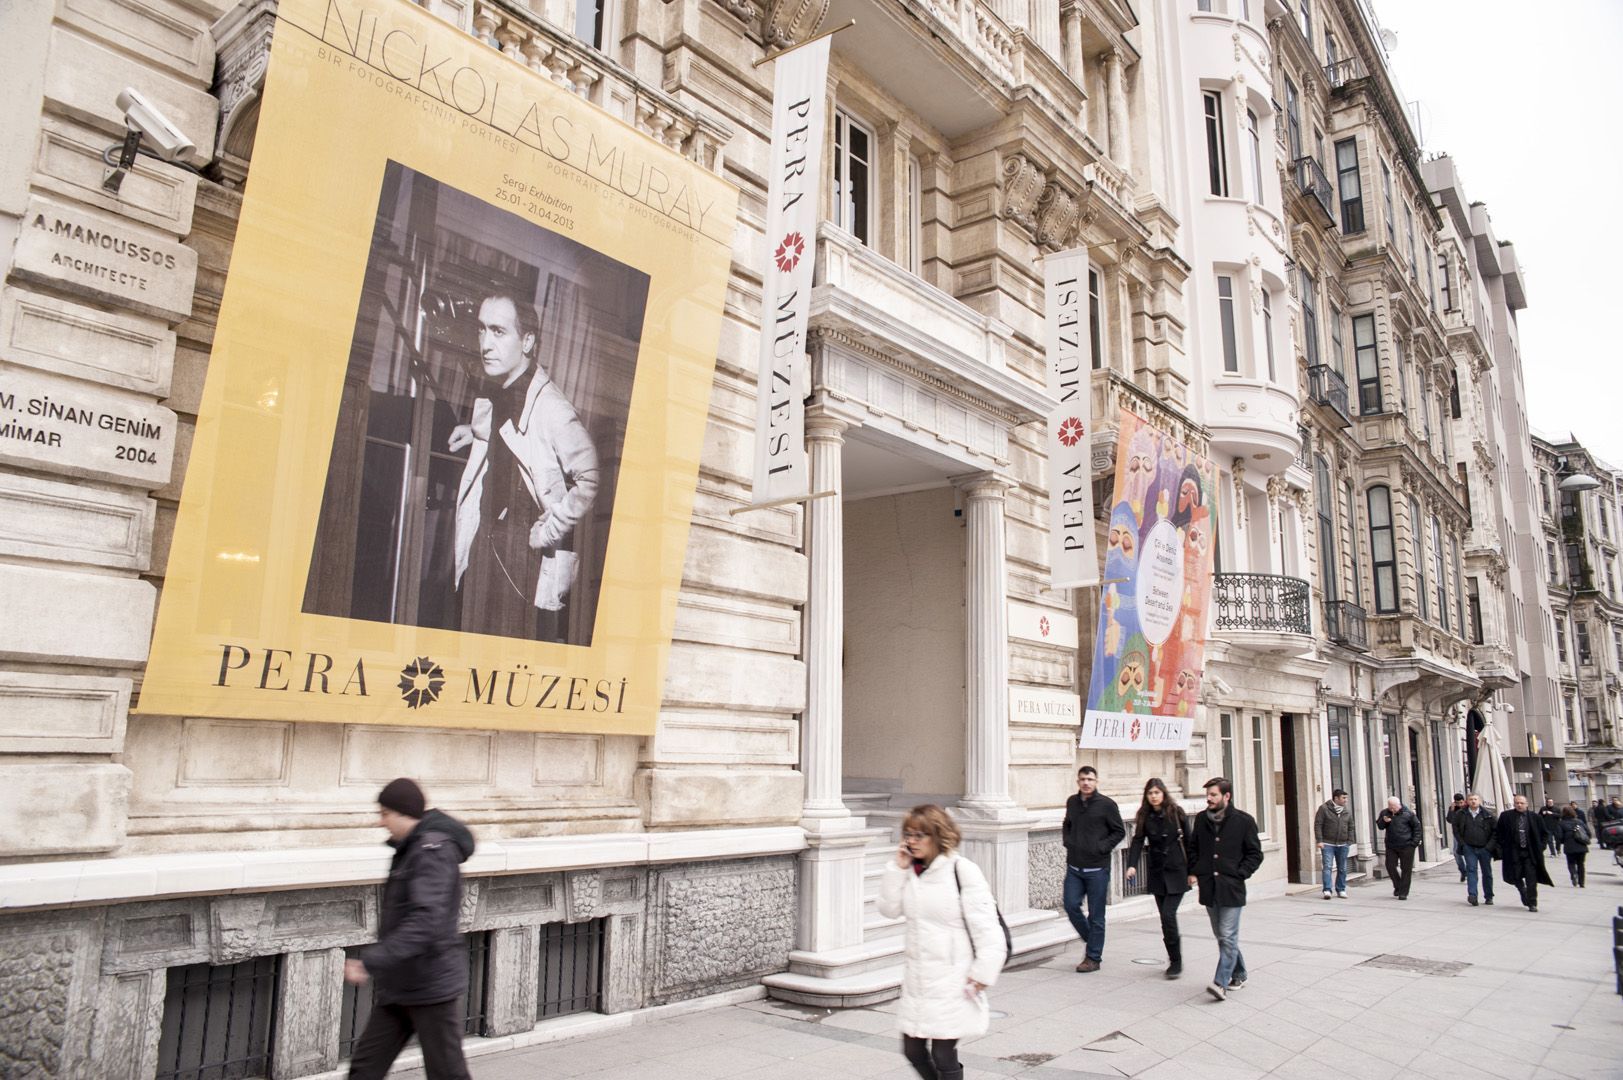 Pera Museum: A Cultural Oasis in the Heart of Istanbul